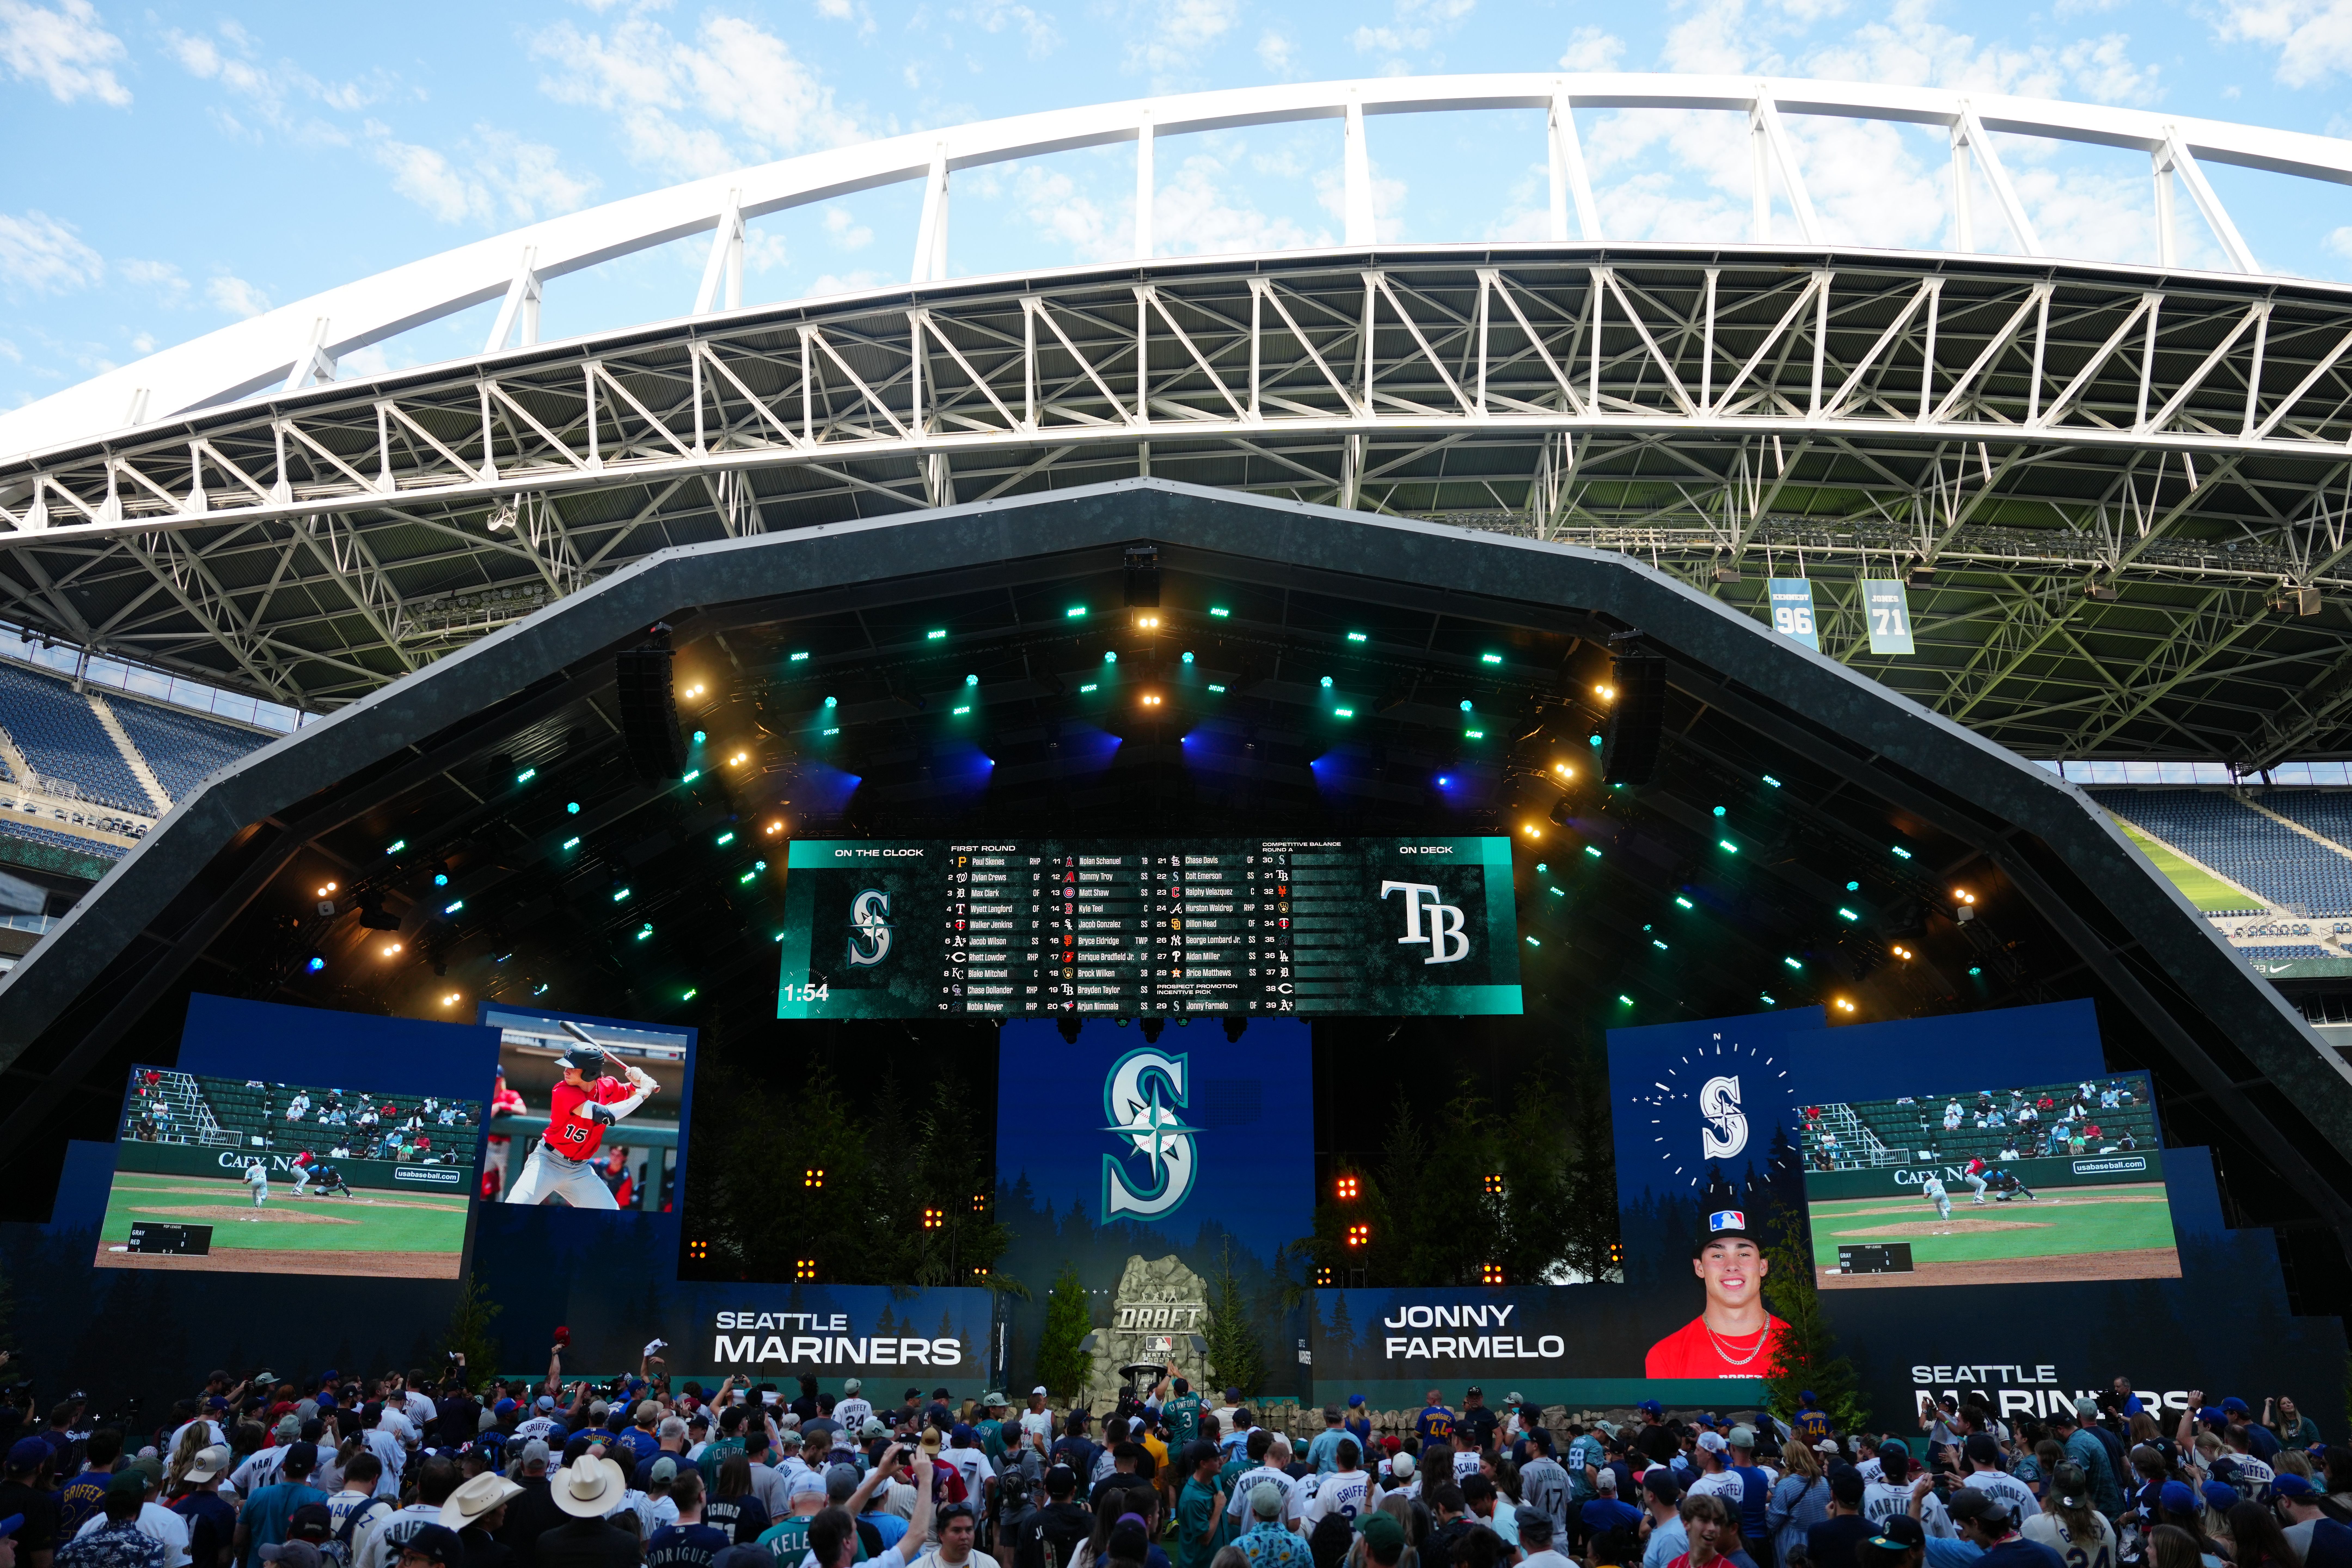 Lumen Field is shown lit up and with the Seattle Mariners logo as a crowd looks on at screens.